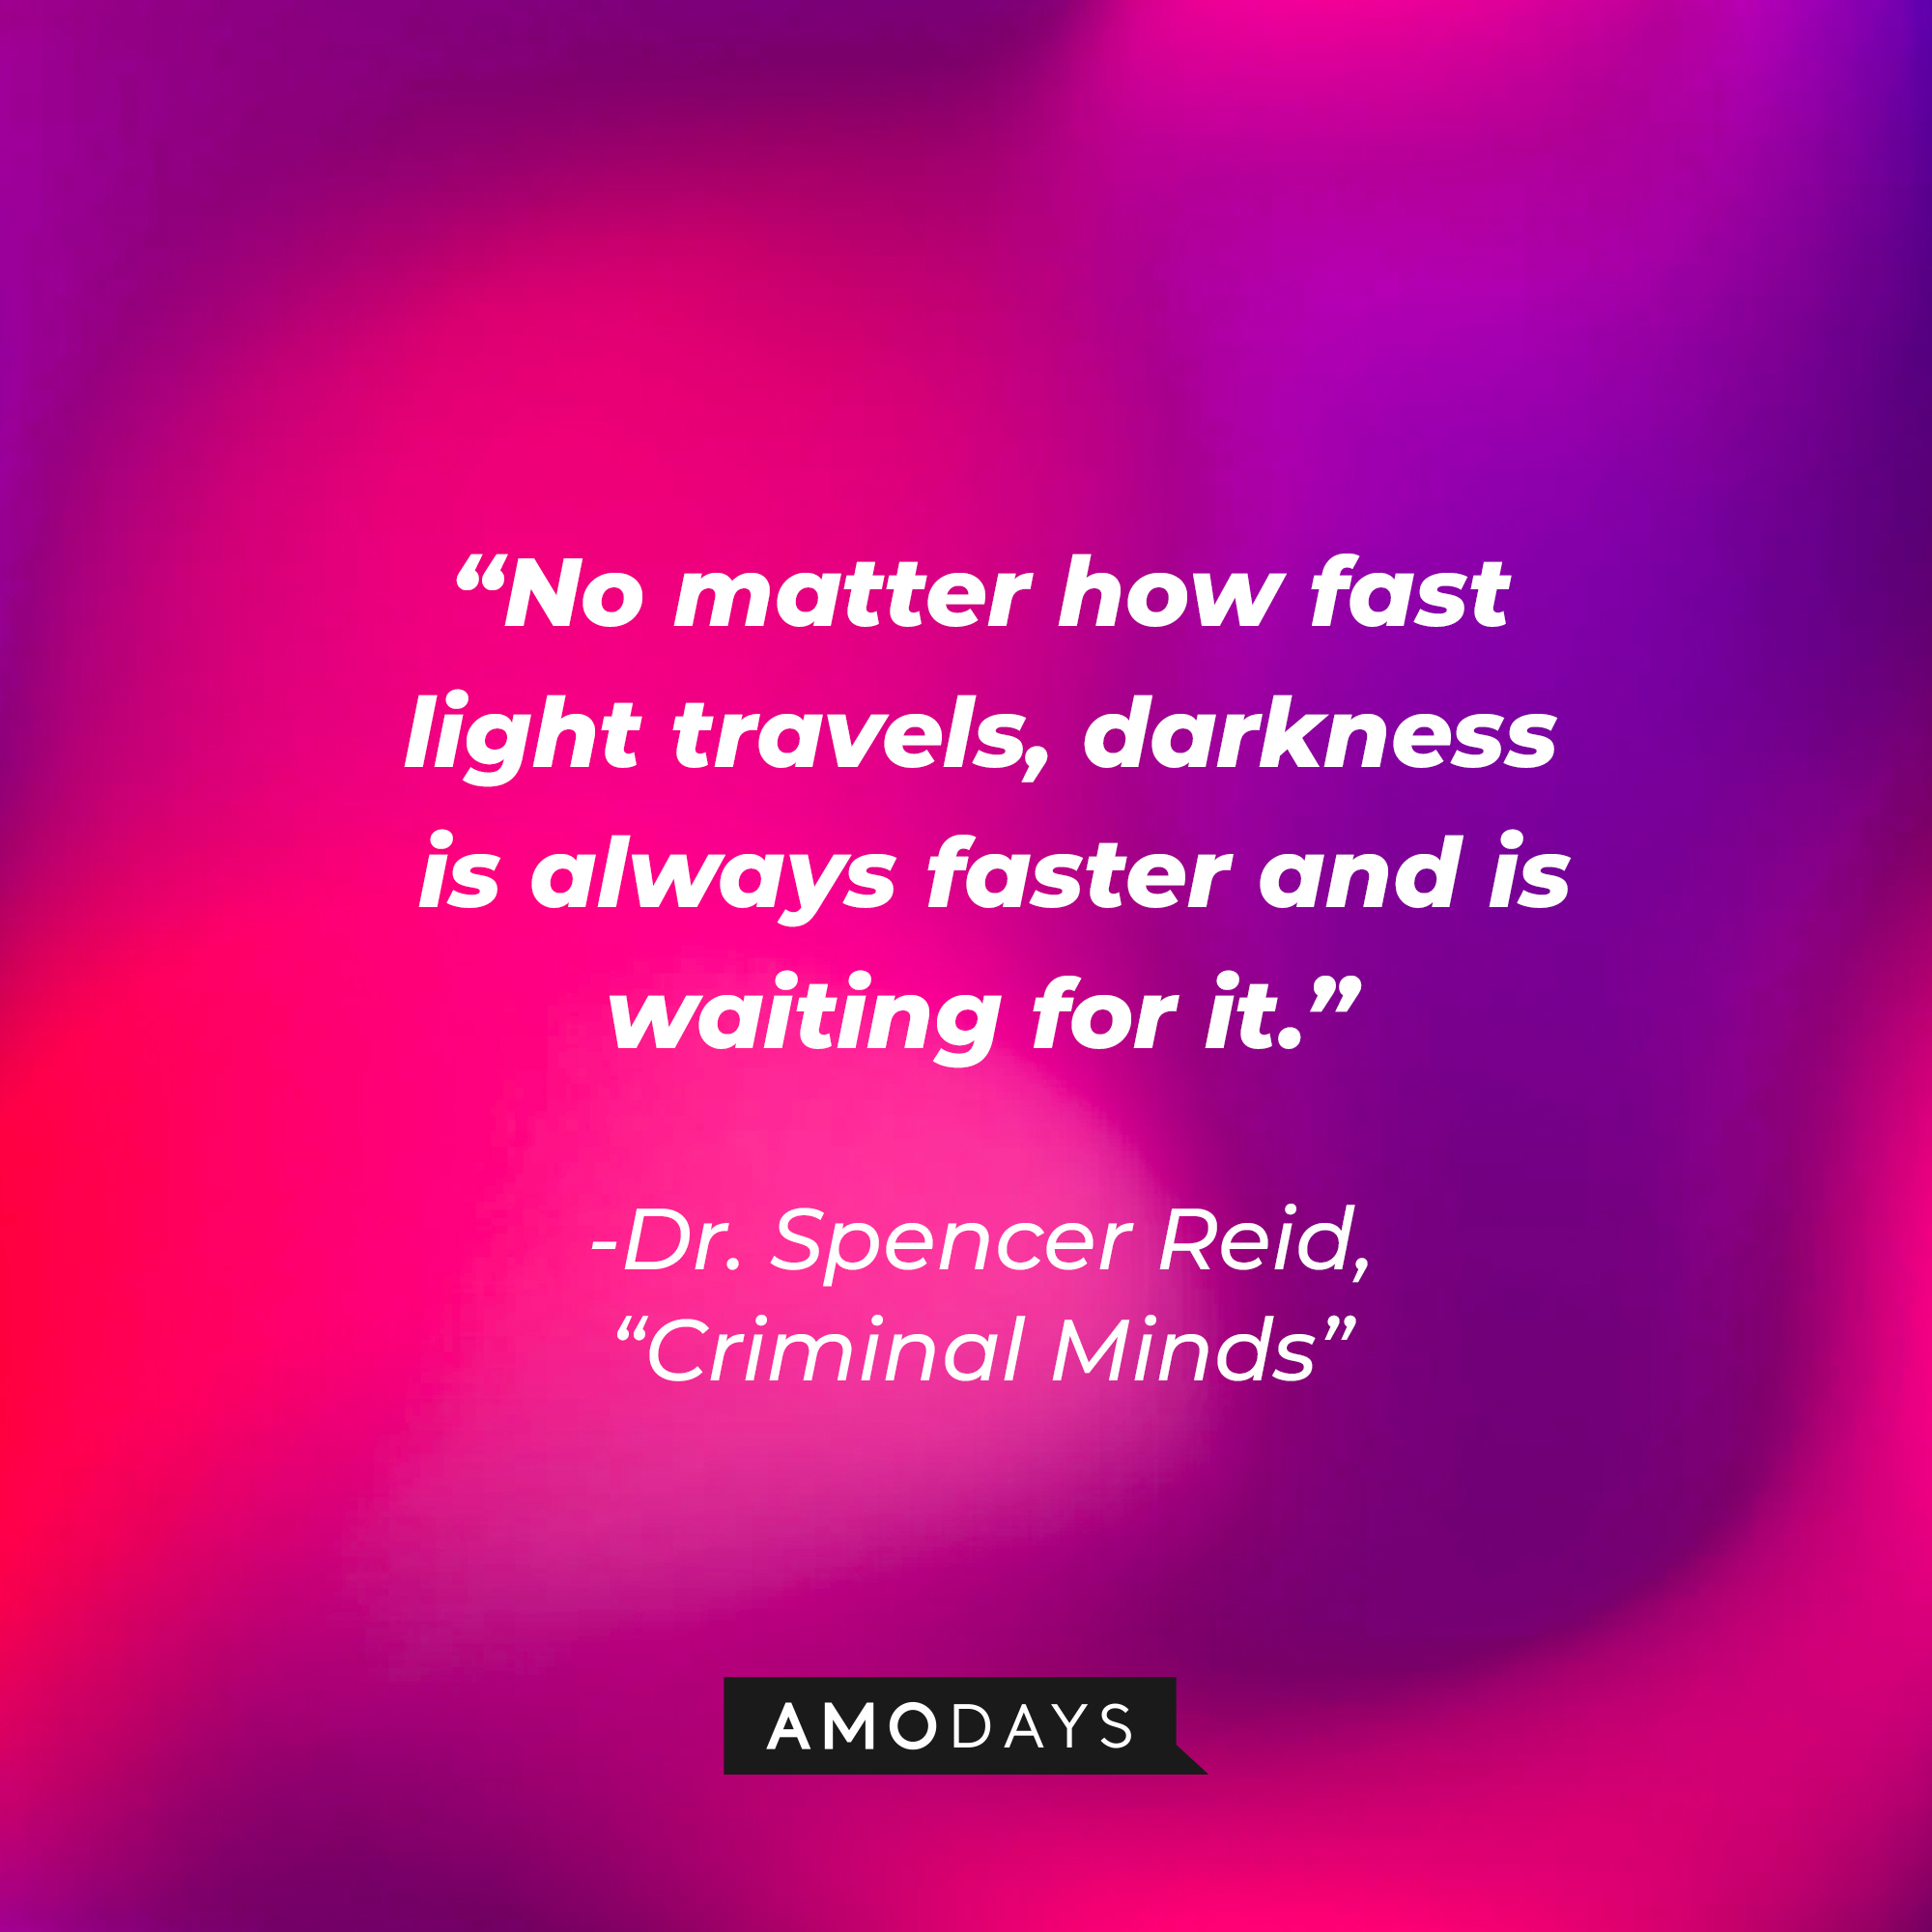 Dr. Spencer Reid's quote: “No matter how fast light travels, darkness is always faster and is waiting for it. | Source: Amodays